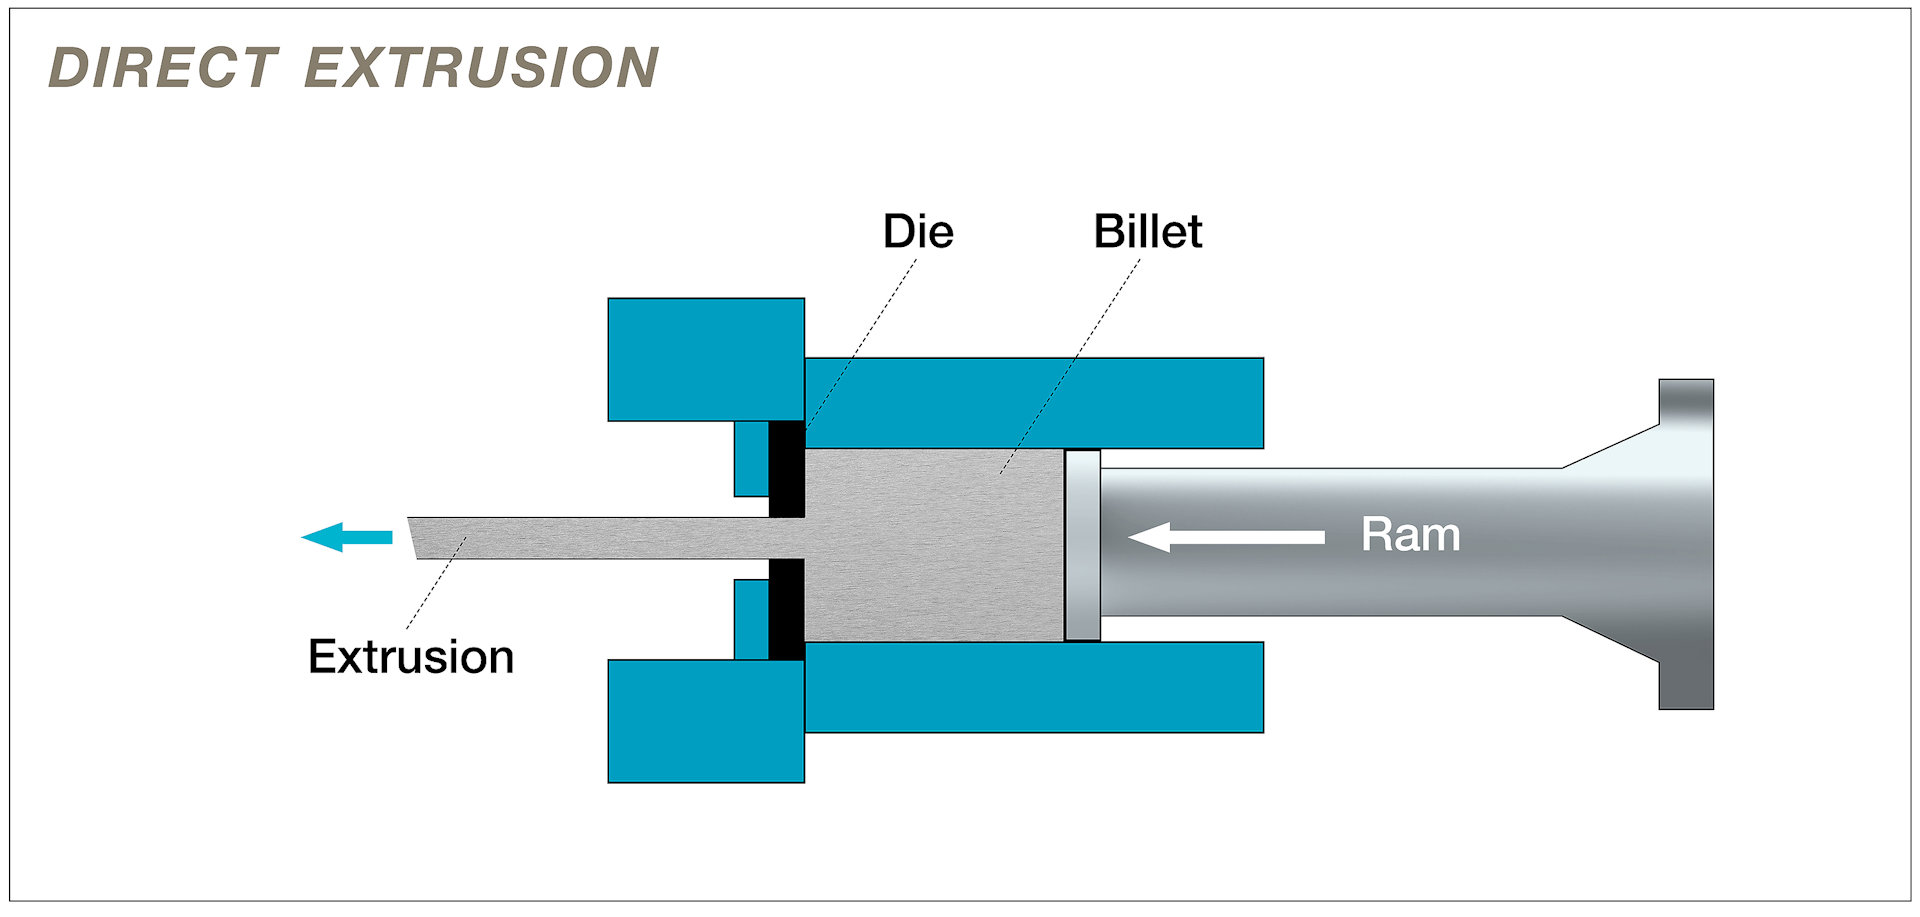 A_schematic_diagram_of_the_direct_extrusion_process.jpg